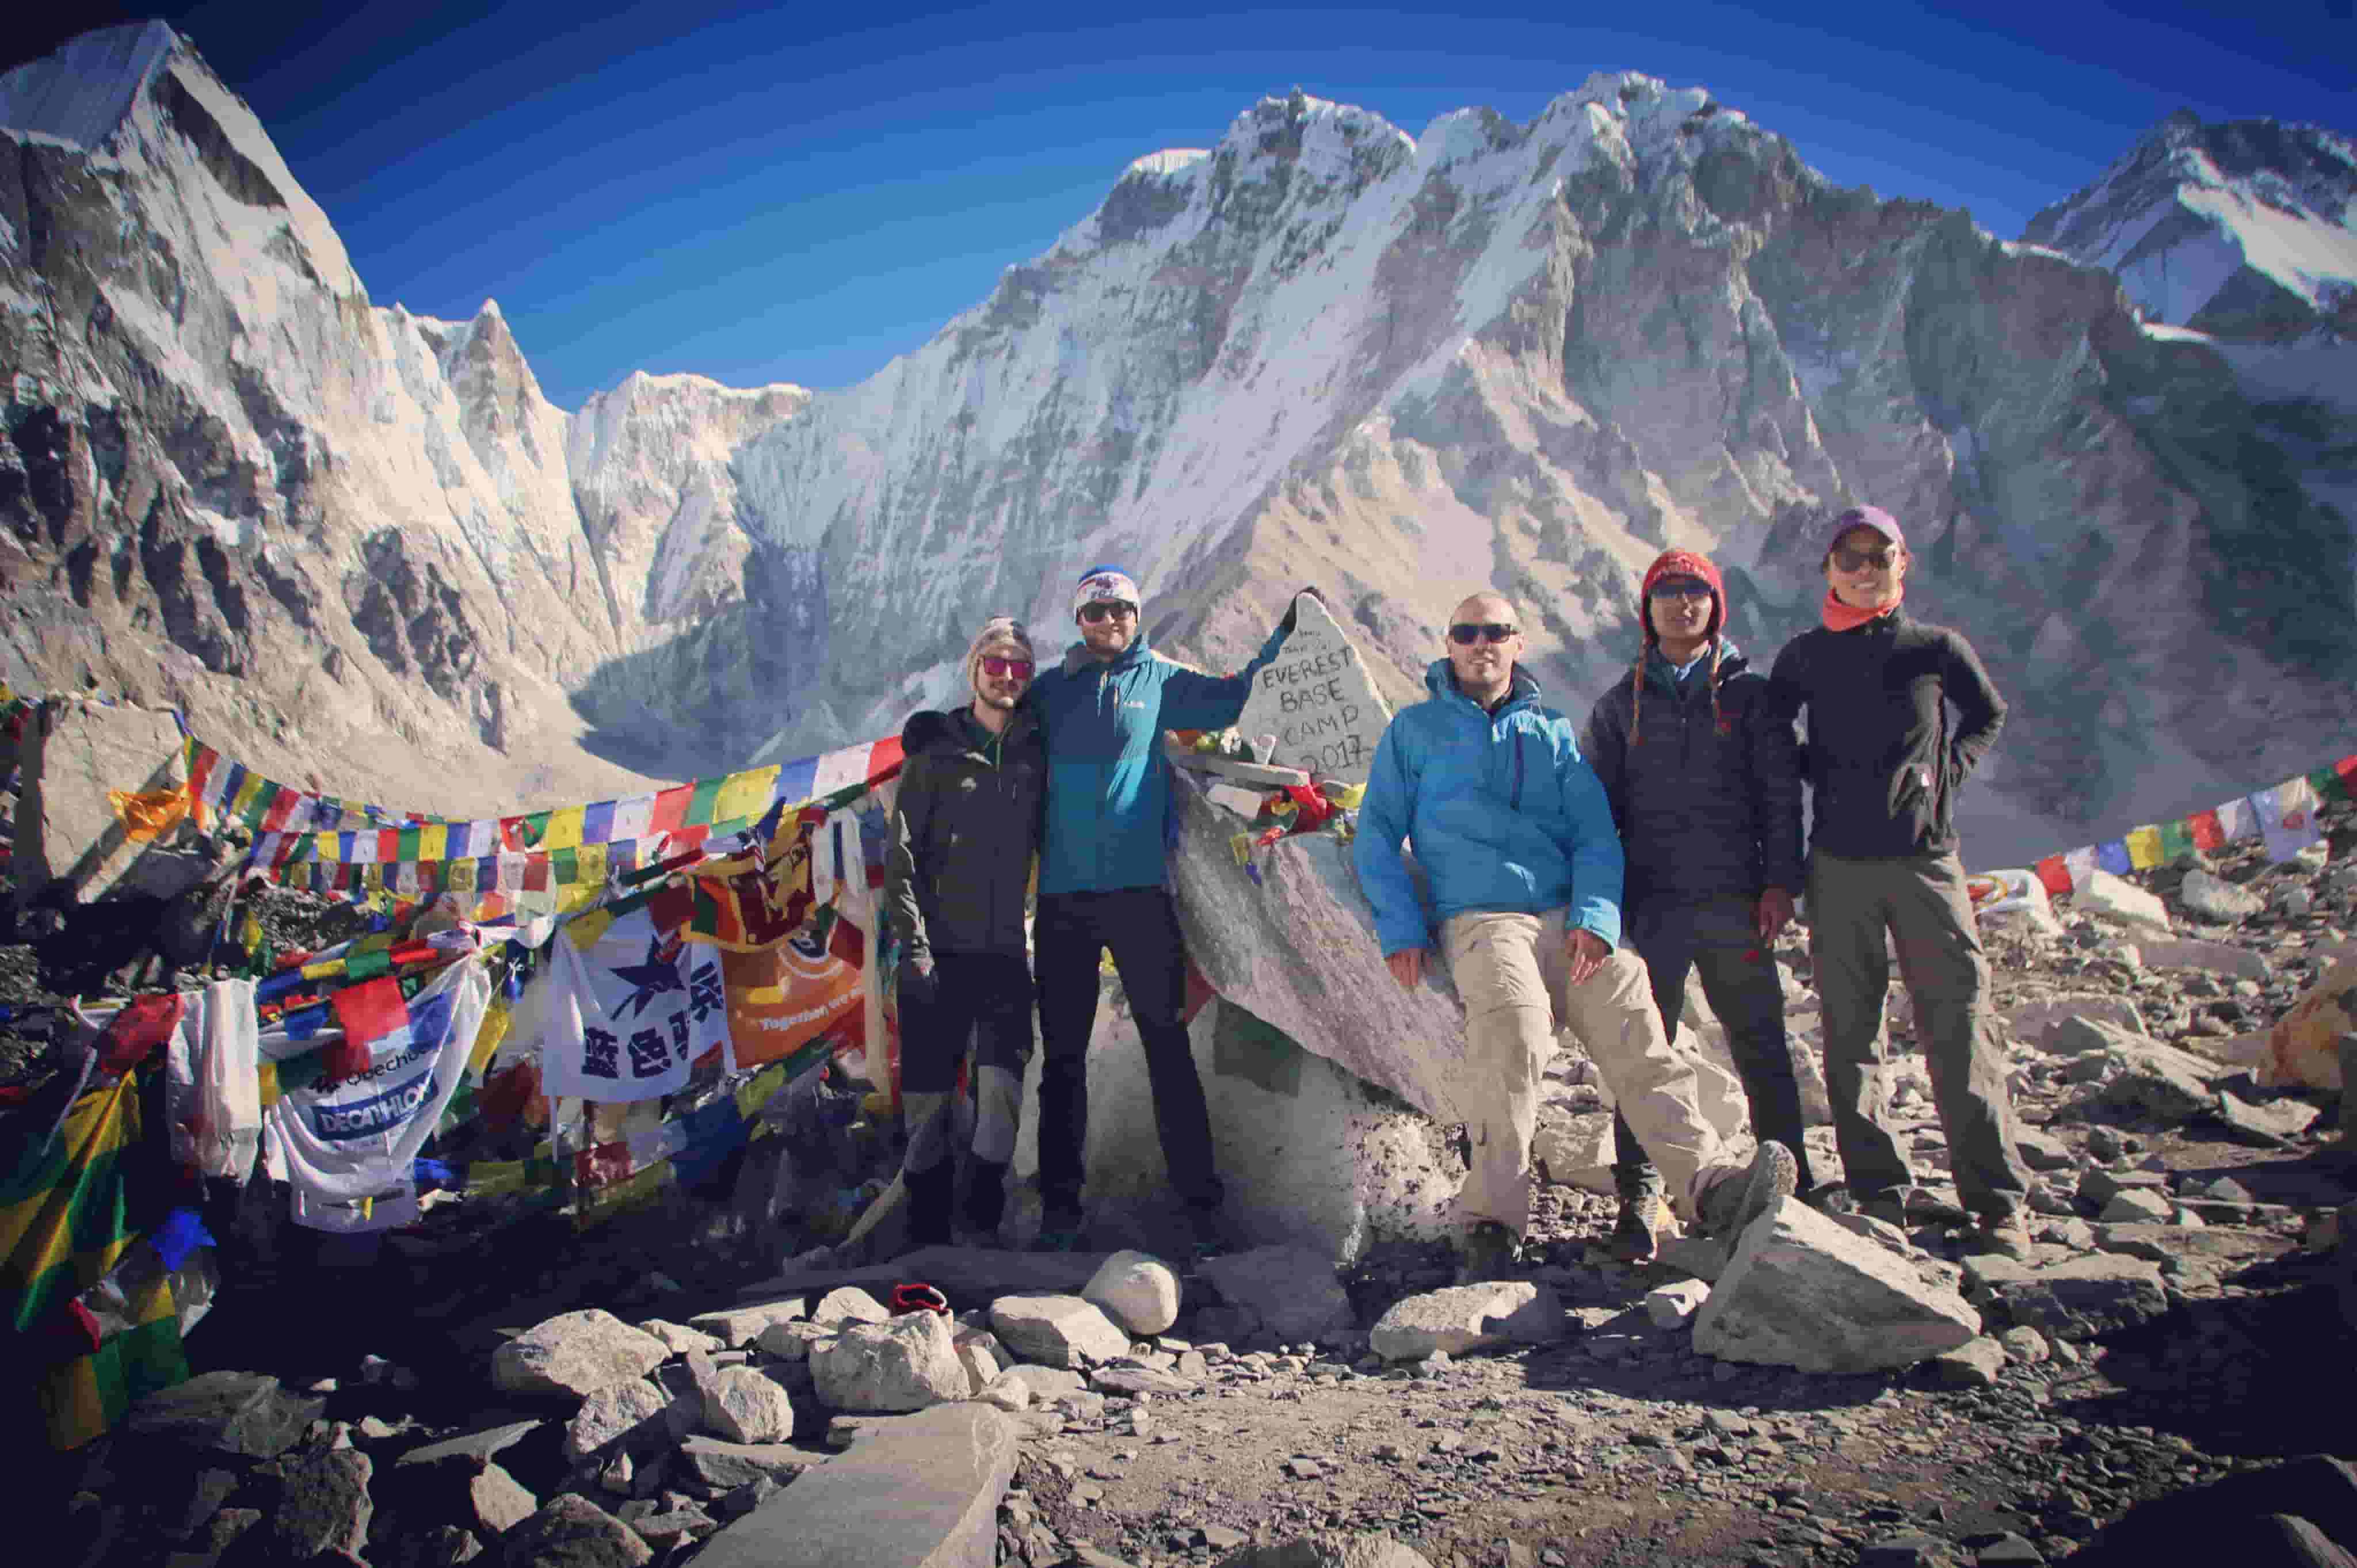 How Difficult Is Everest Base Camp Trek?